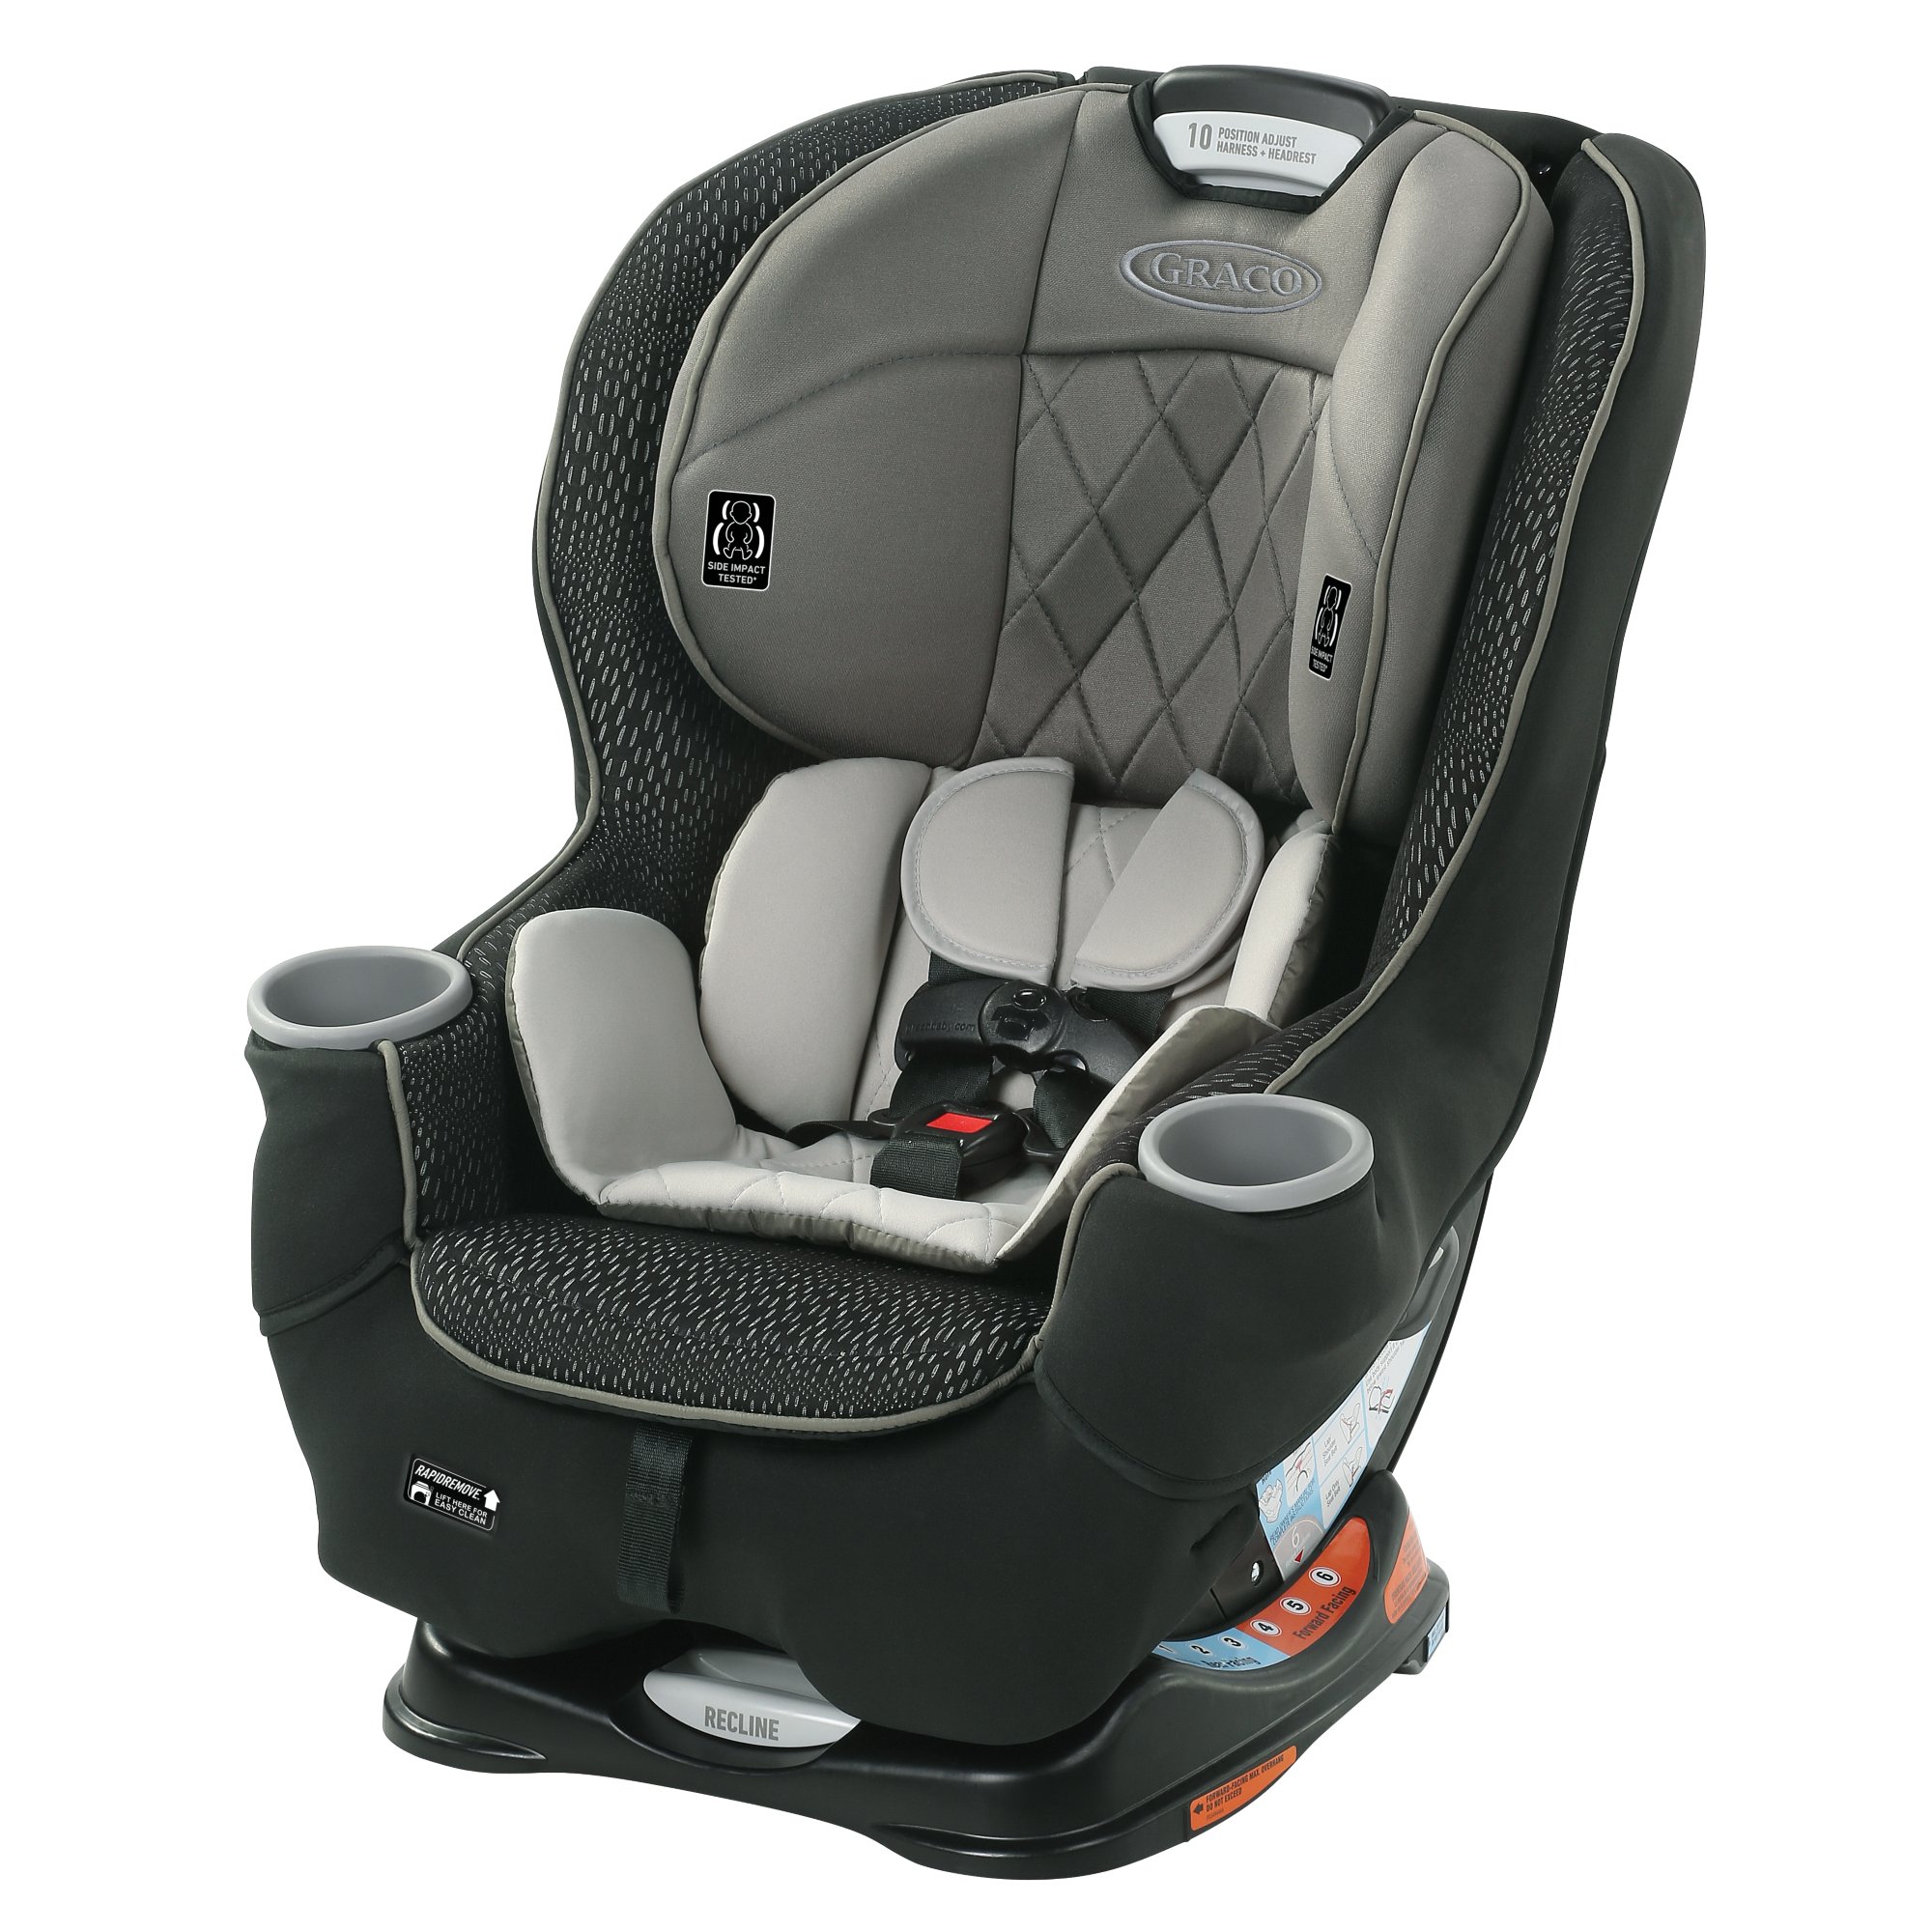 Graco Baby Sequence 65 Convertible Child Safety Car Seat Malibu NEW 